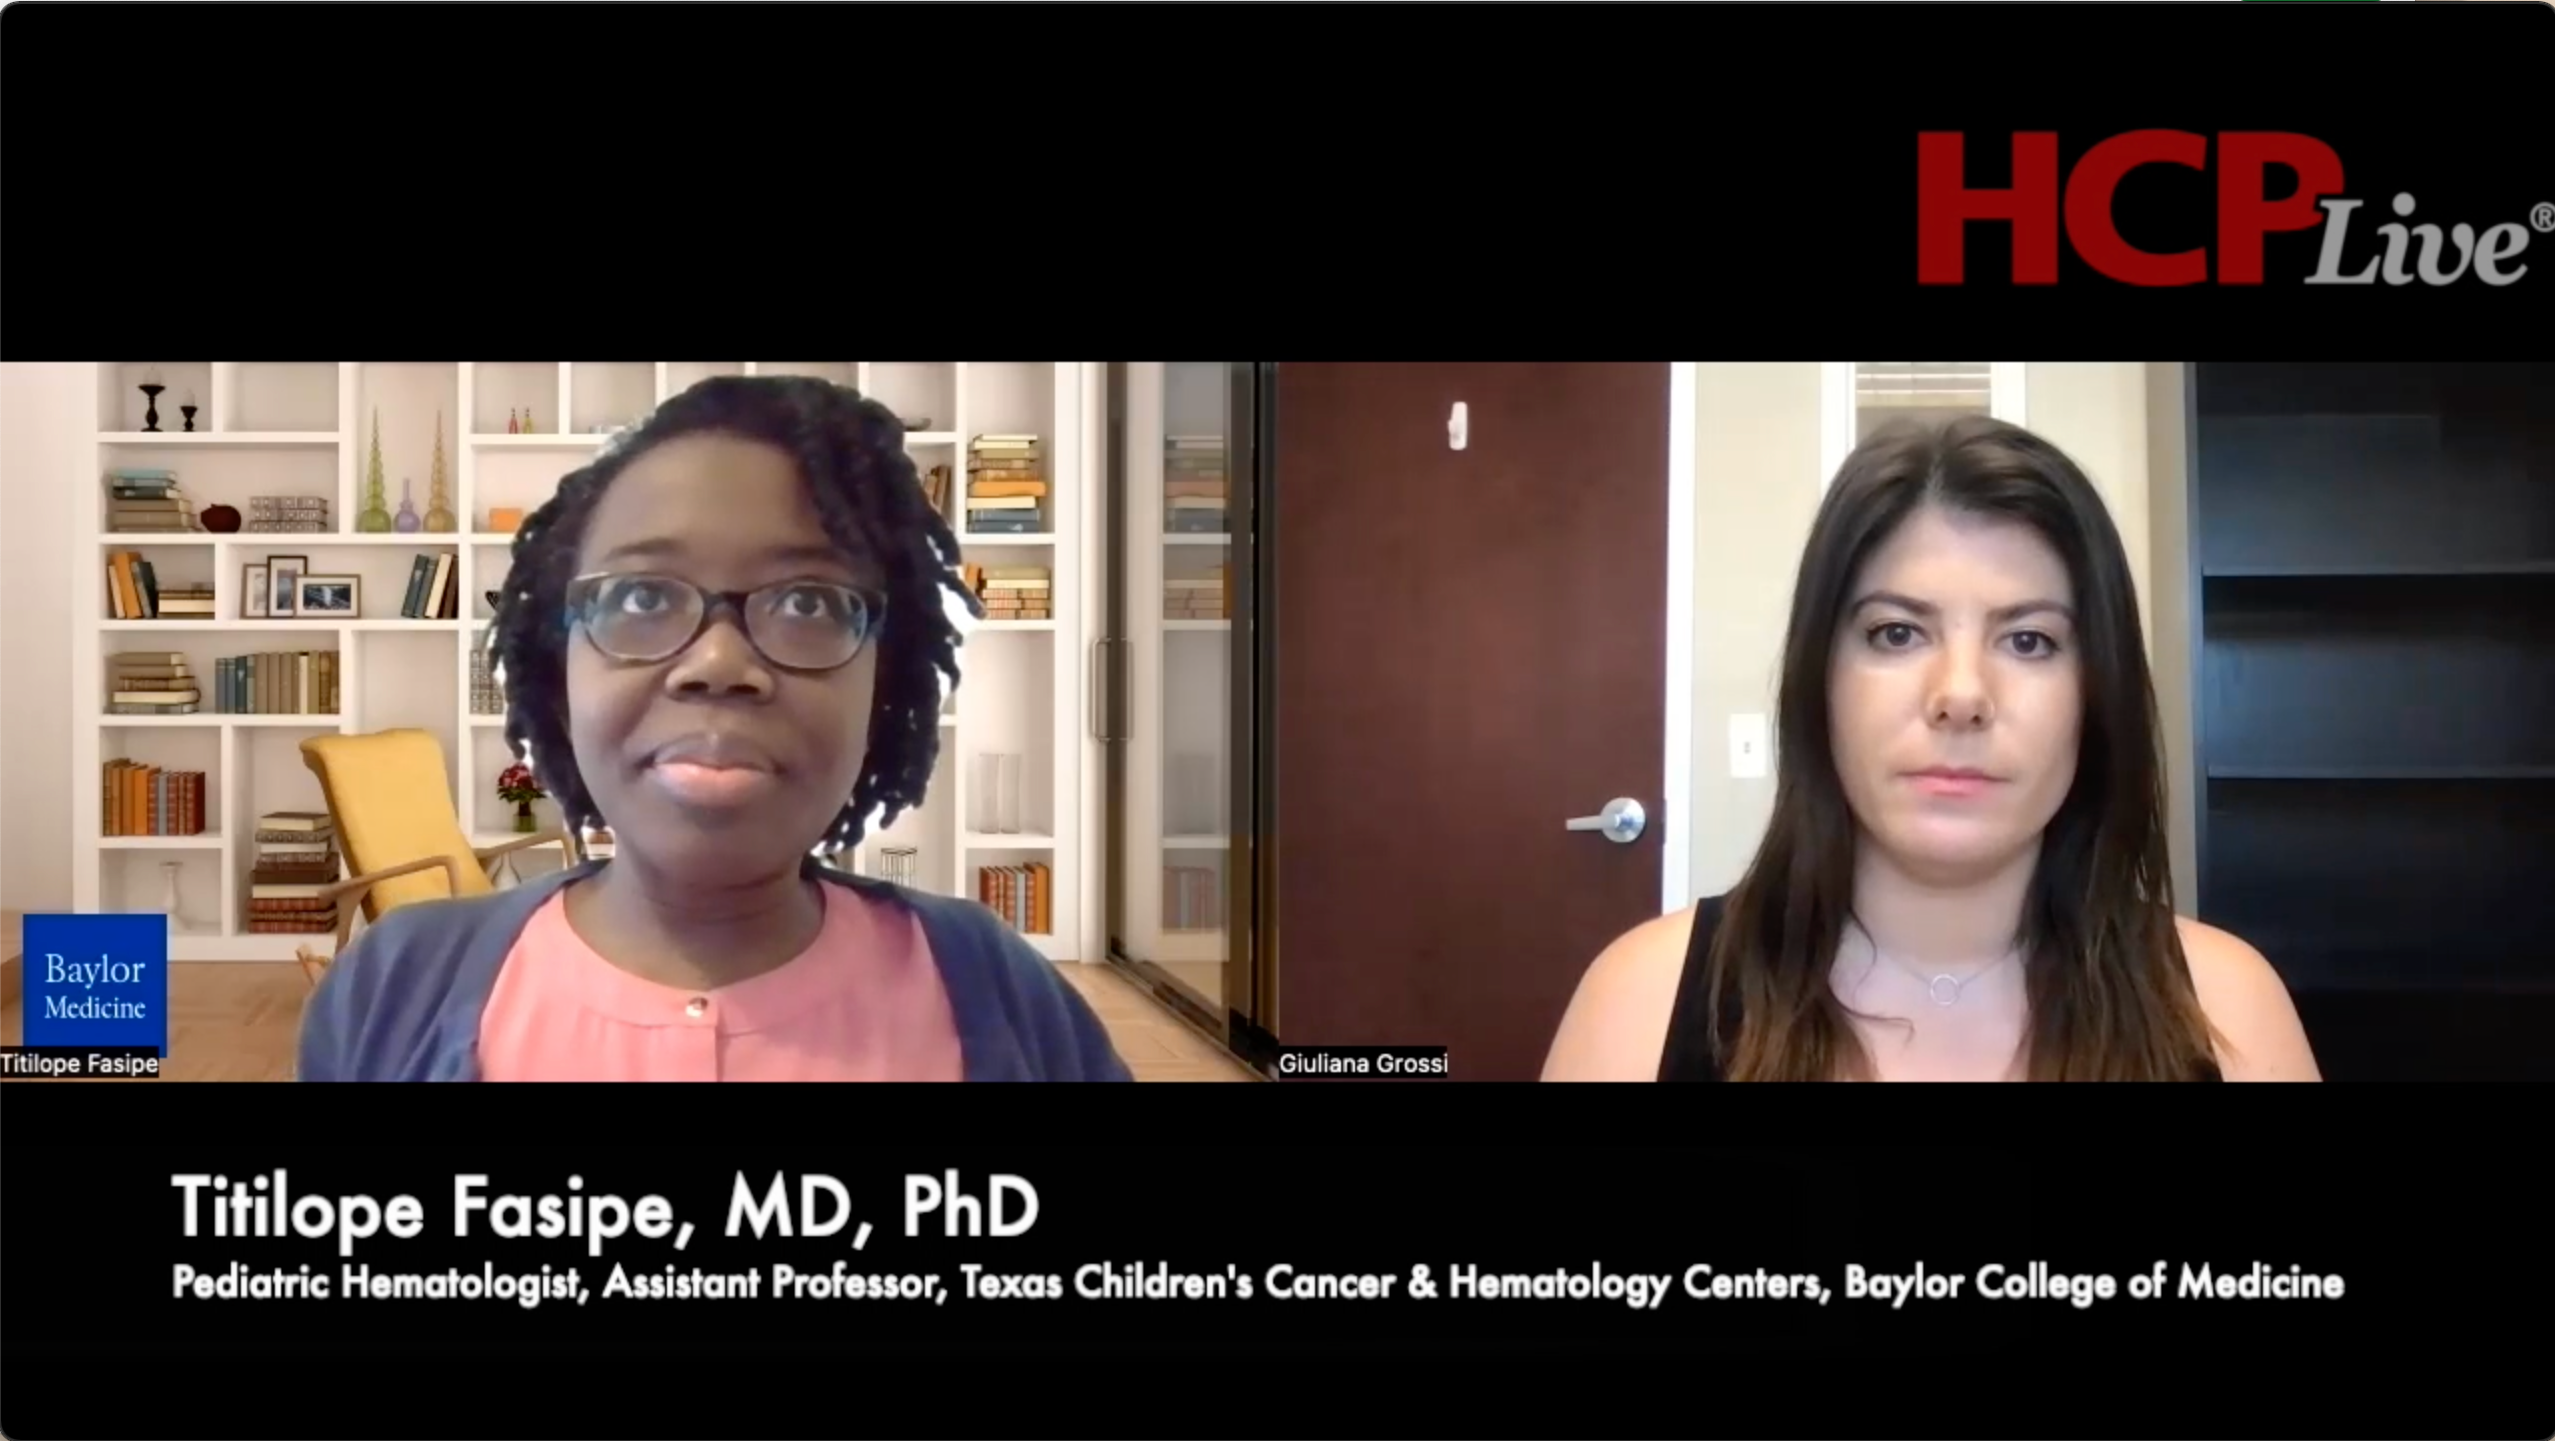 Titilope Fasipe, MD, PhD: Confidence in Treating Sickle Cell with Disease Modifying Drugs